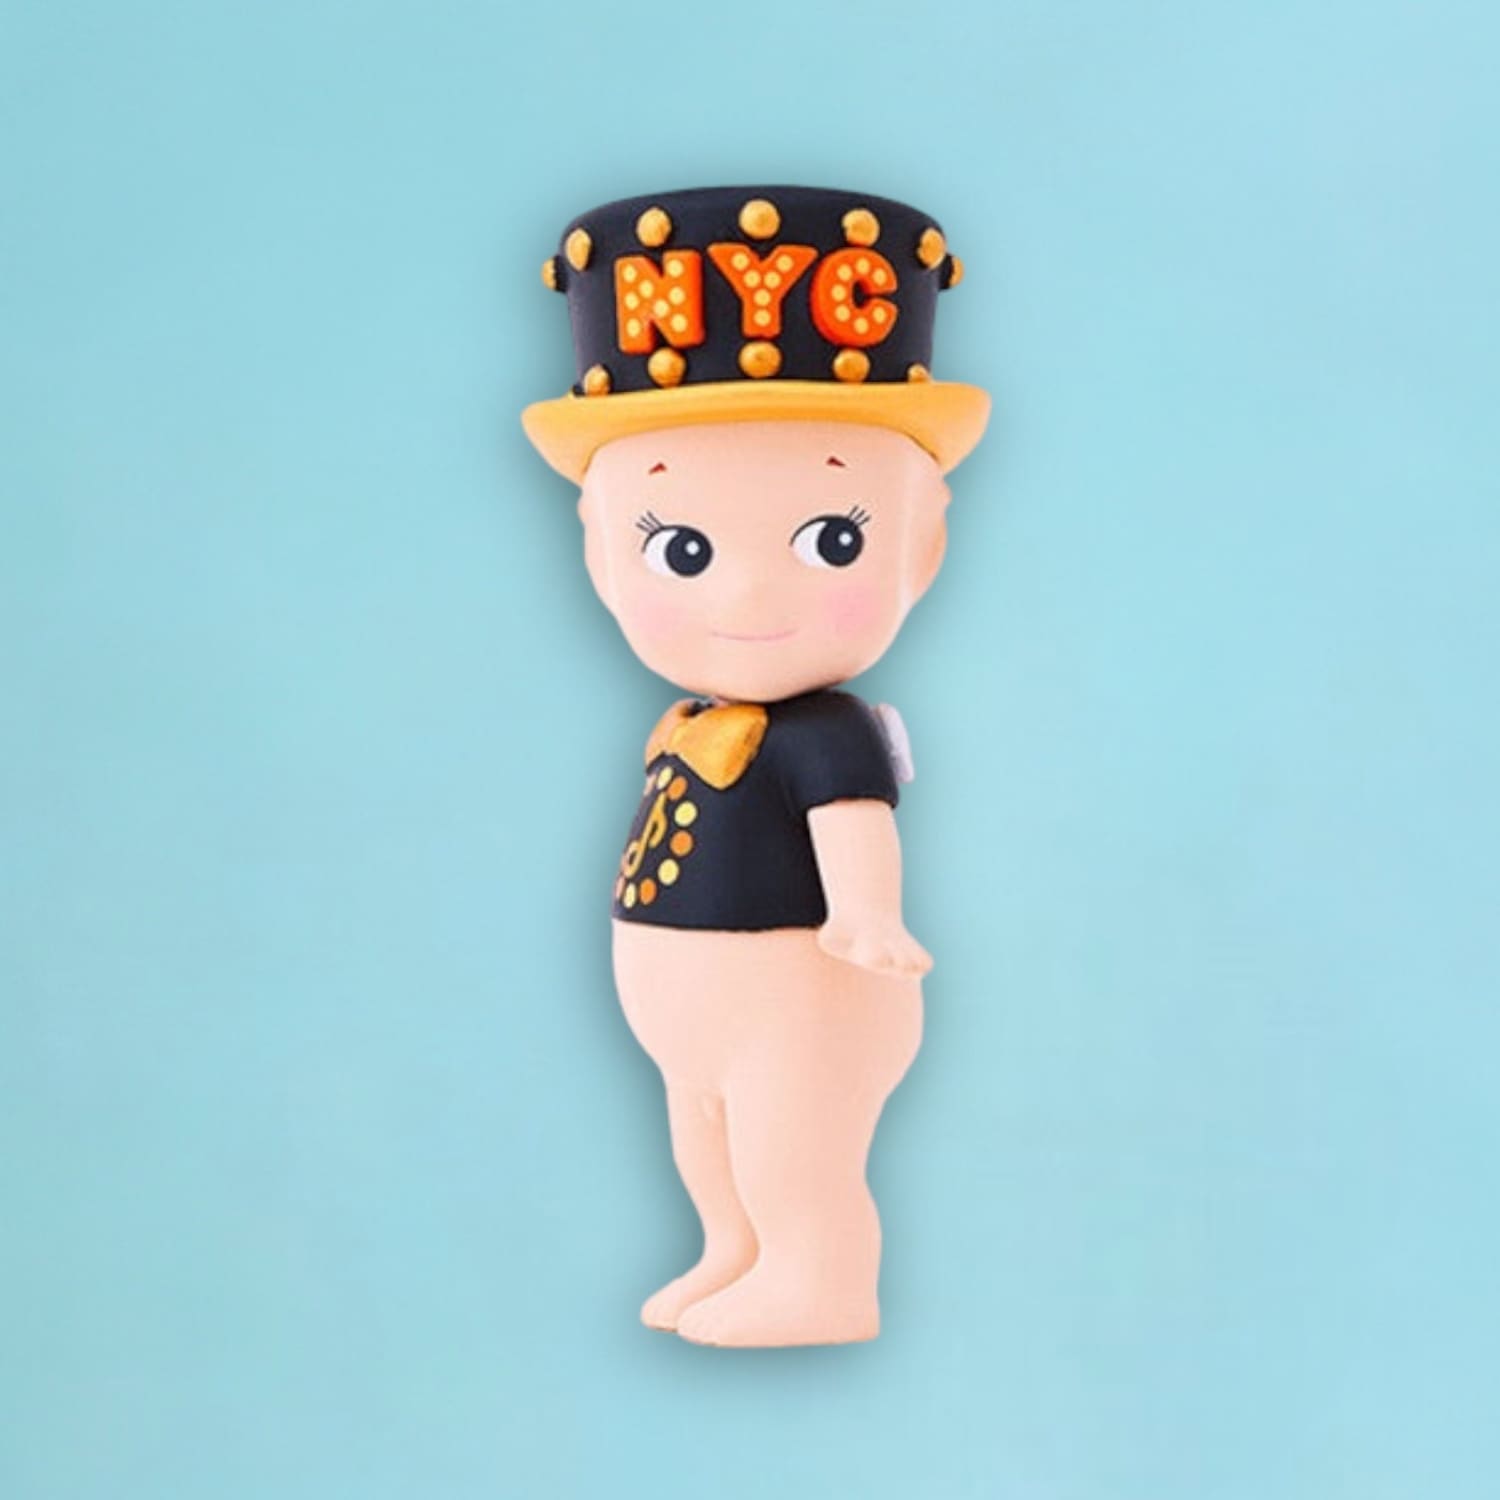 Sonny Angel - In New York Blind Box - Collectible - Kawaii